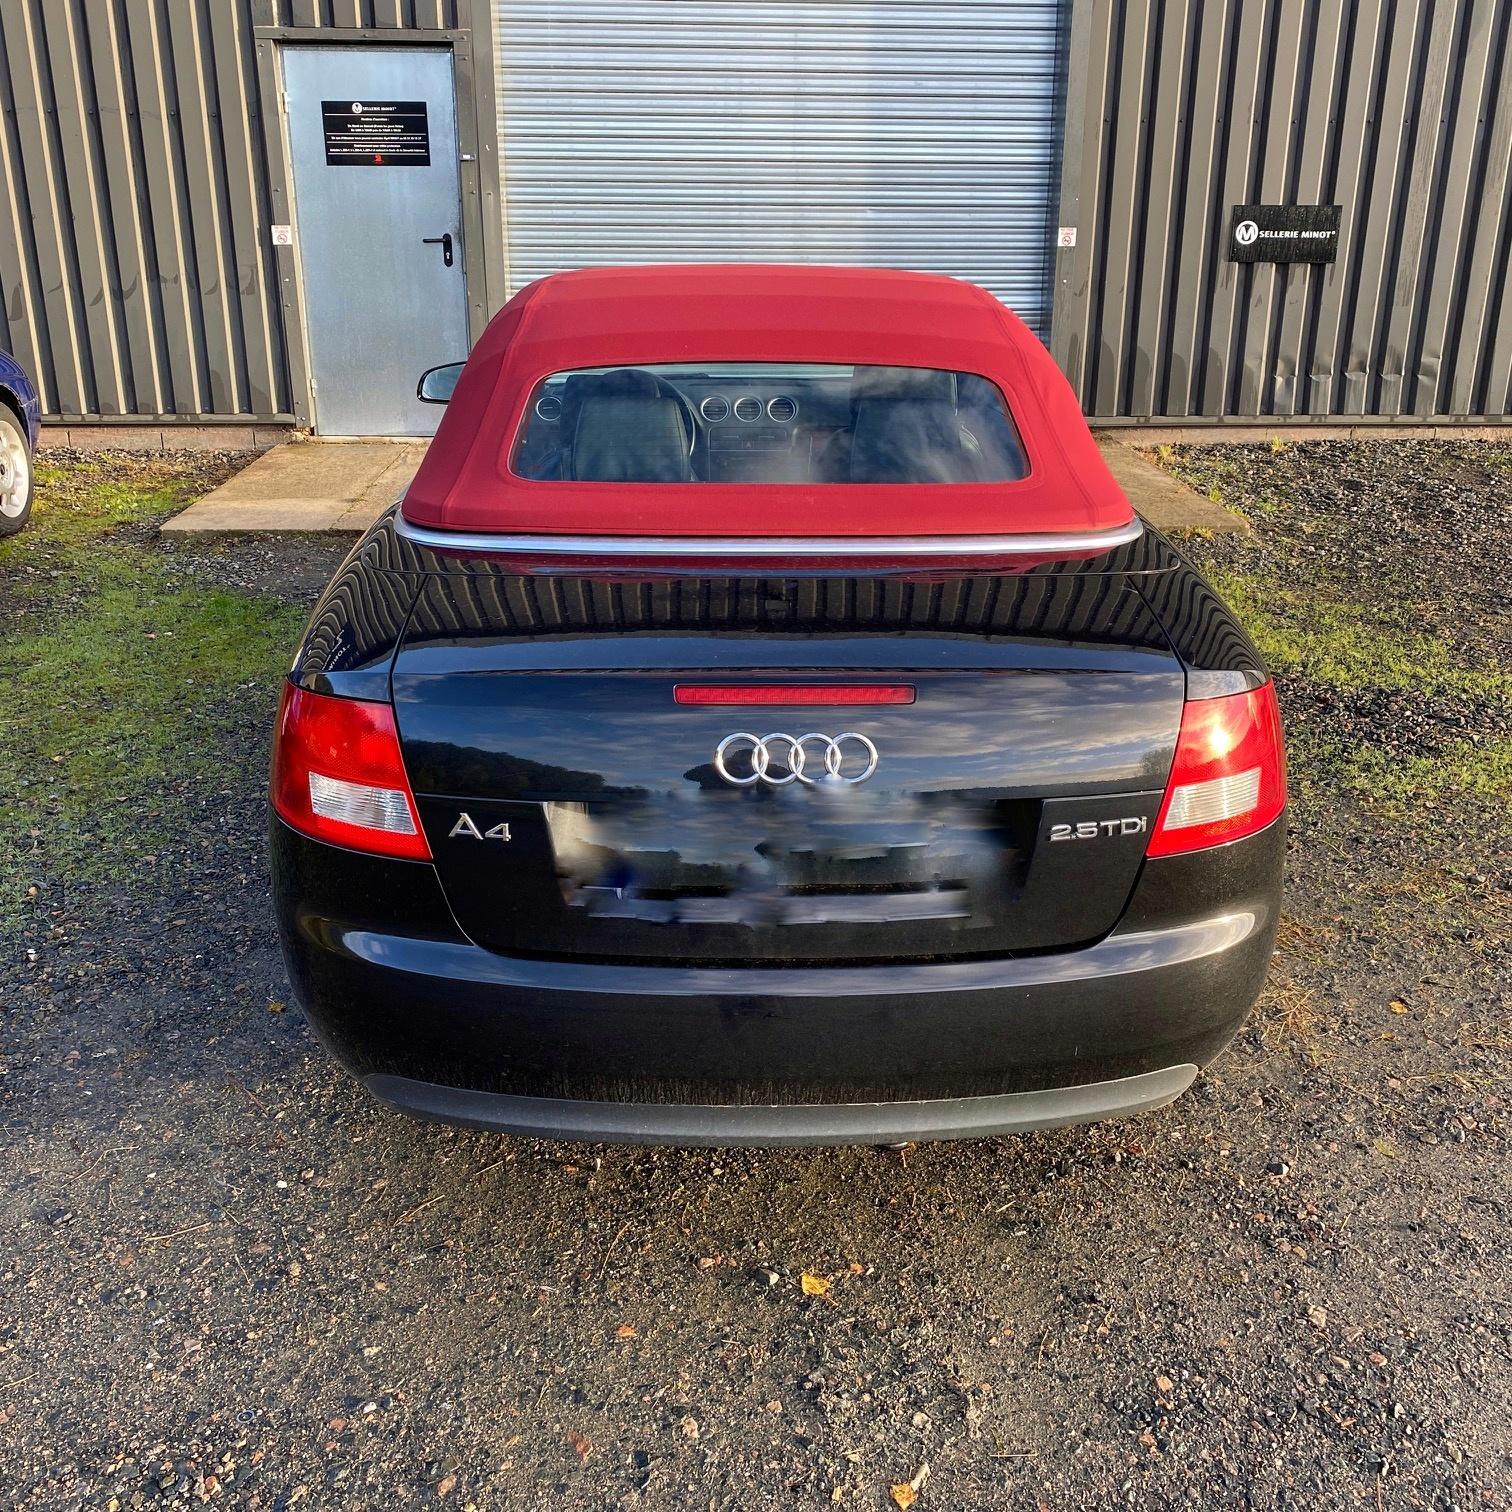 Remplacement capote AUDI A4 cabriolet - SELLERIE MINOT